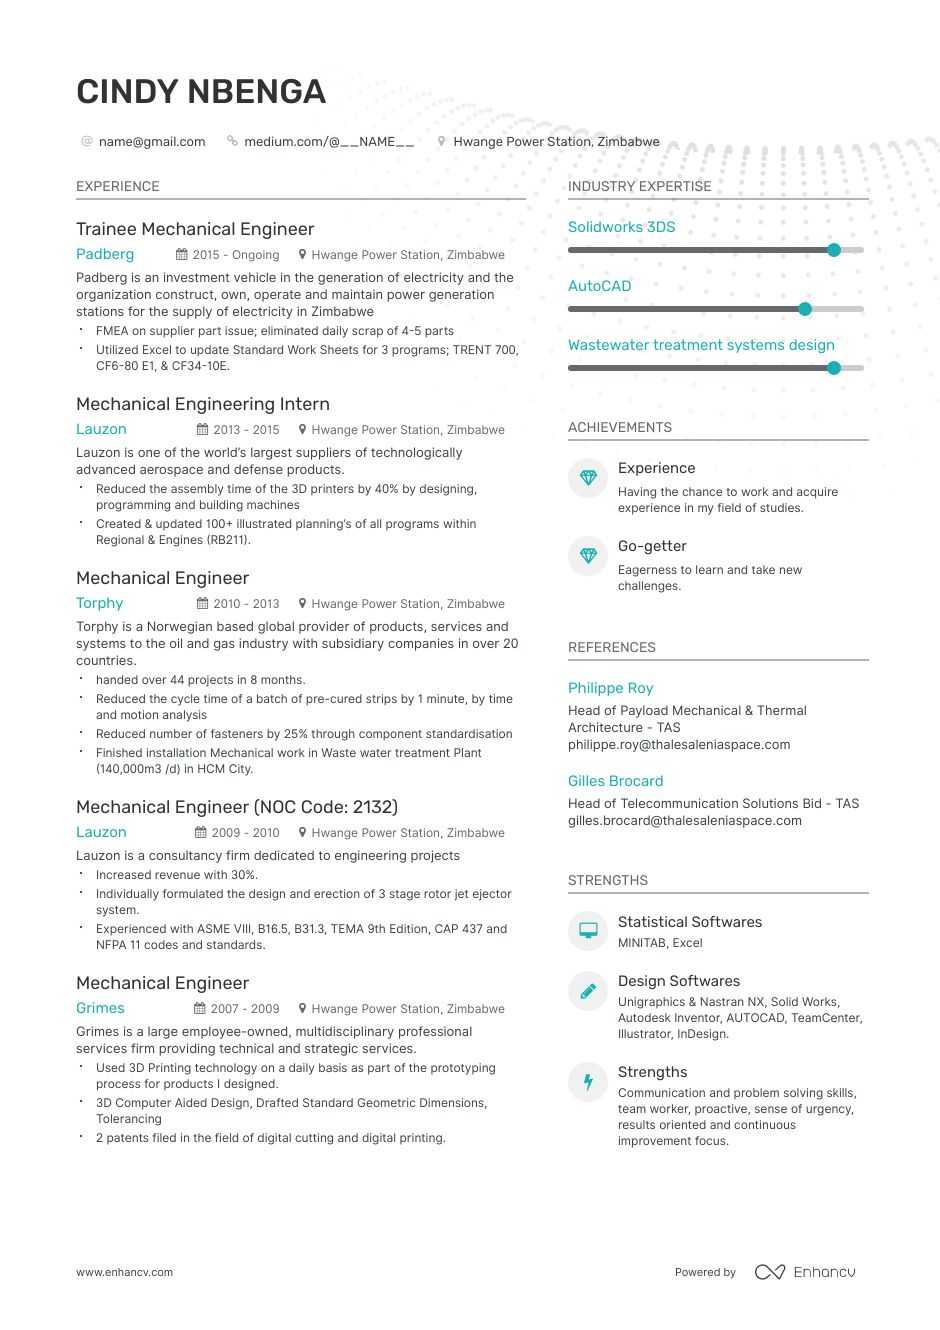 DOWNLOAD: Mechanical Design Engineer Resume Example for ...